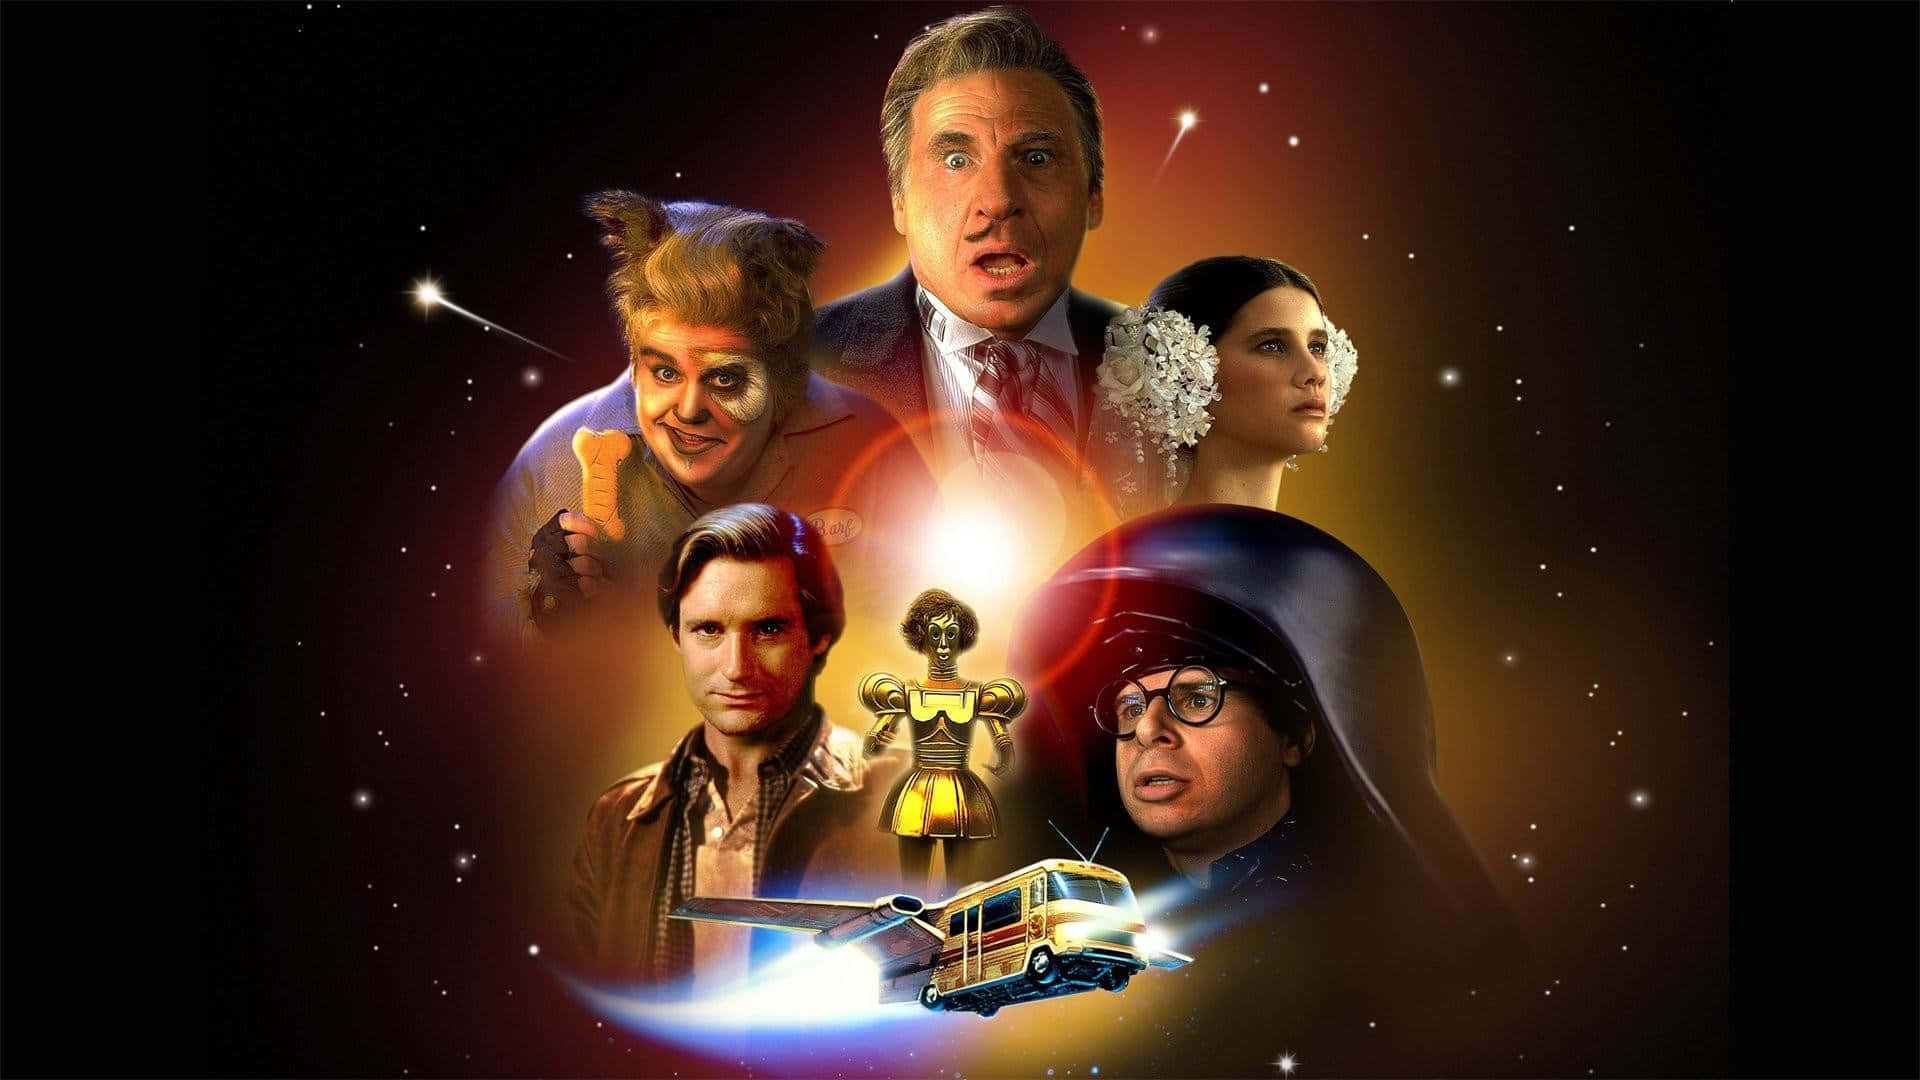 “the Heroes Of Spaceballs On Their Mission To Save Princess Vespa” Background